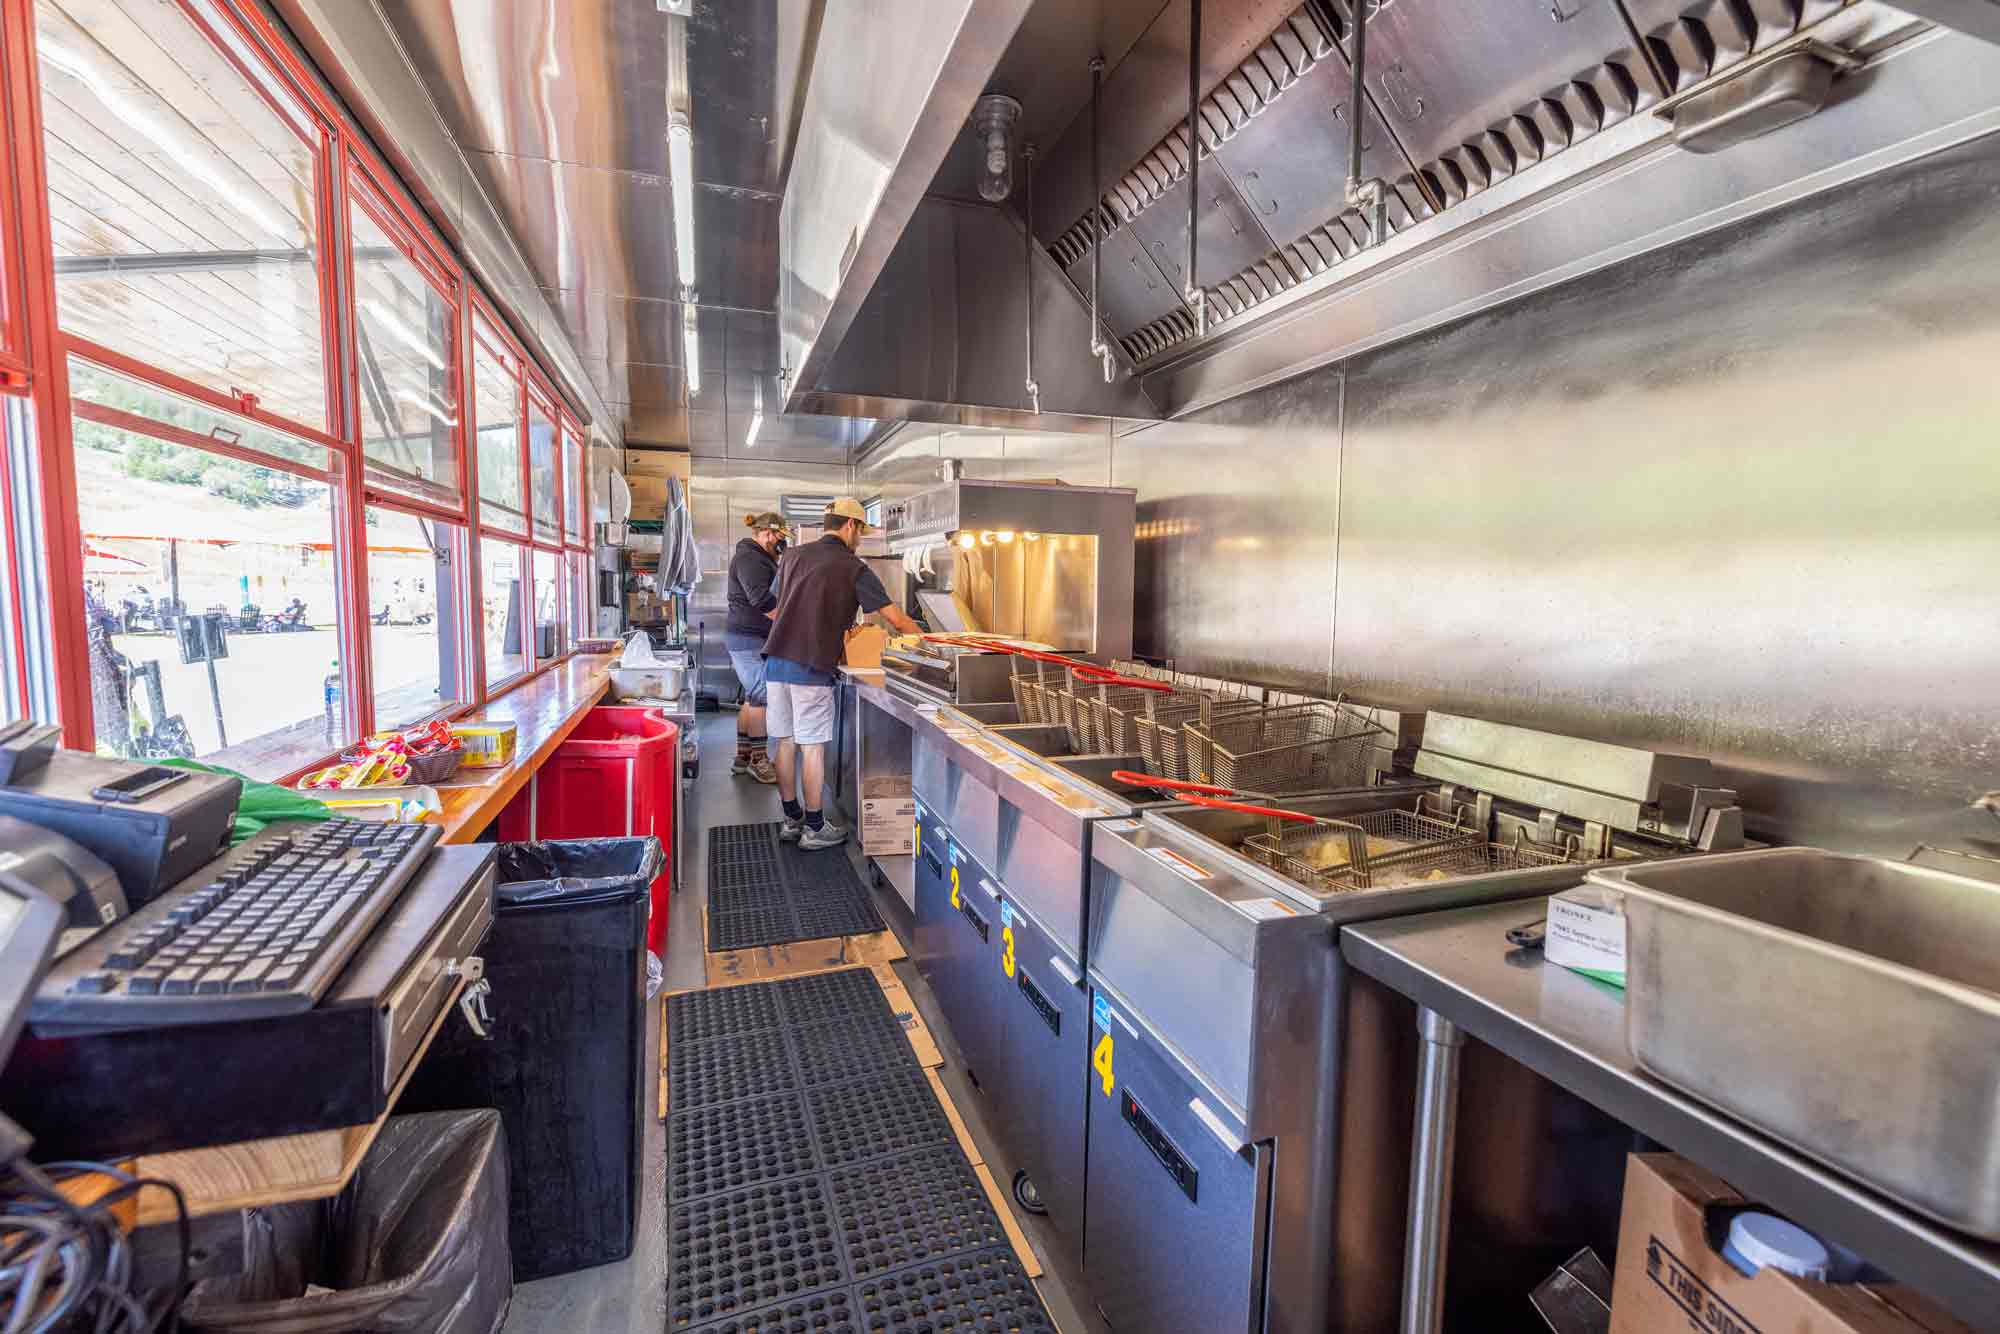 Shipping Container Kitchens, Containerized Kitchens